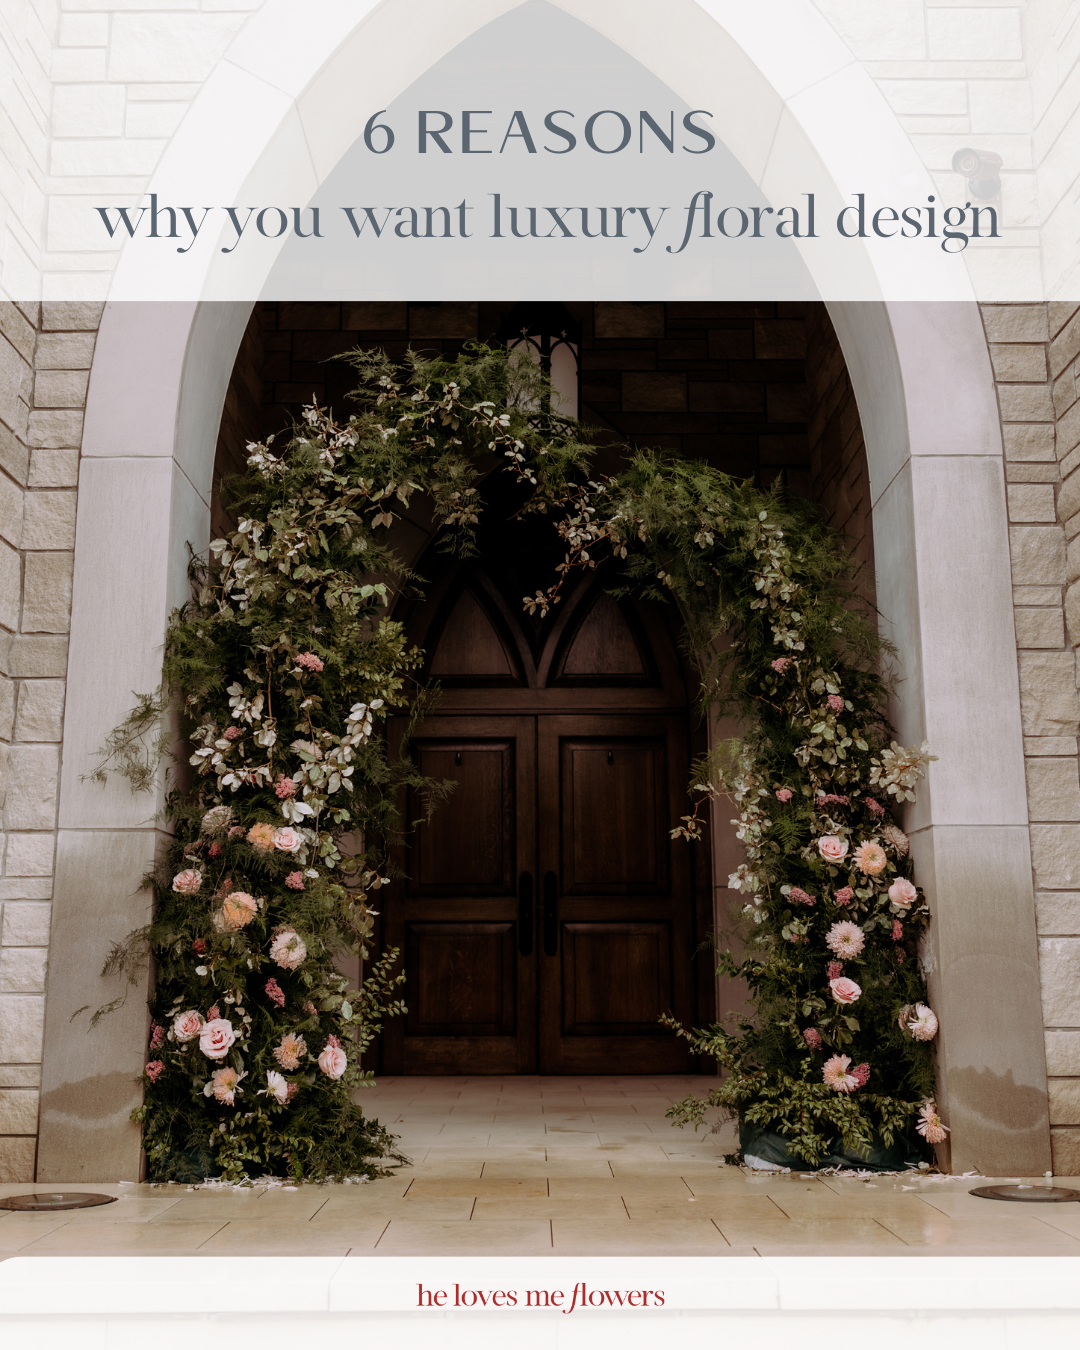 How do you know if you want luxury floral design for your wedding